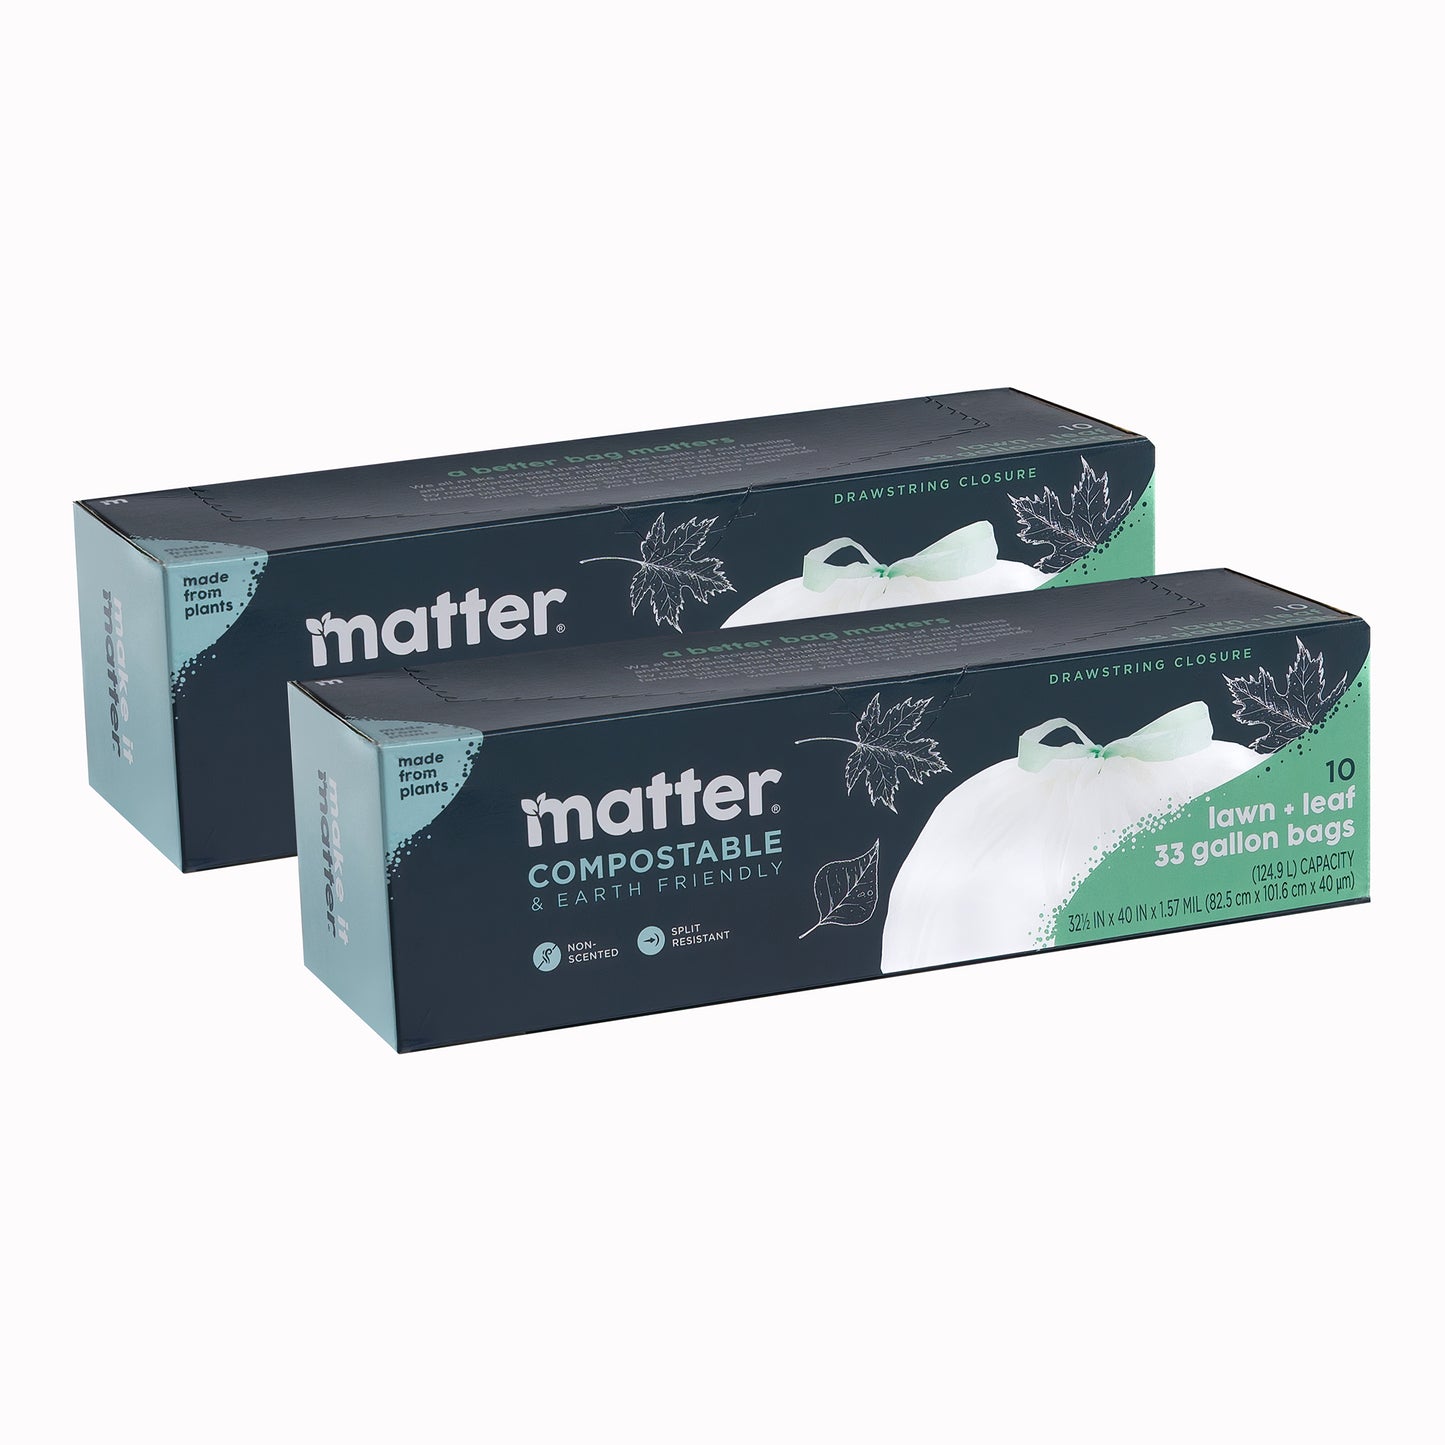 Matter Compostable Lawn & Leaf 33-Gallon Bags - 2 Pack